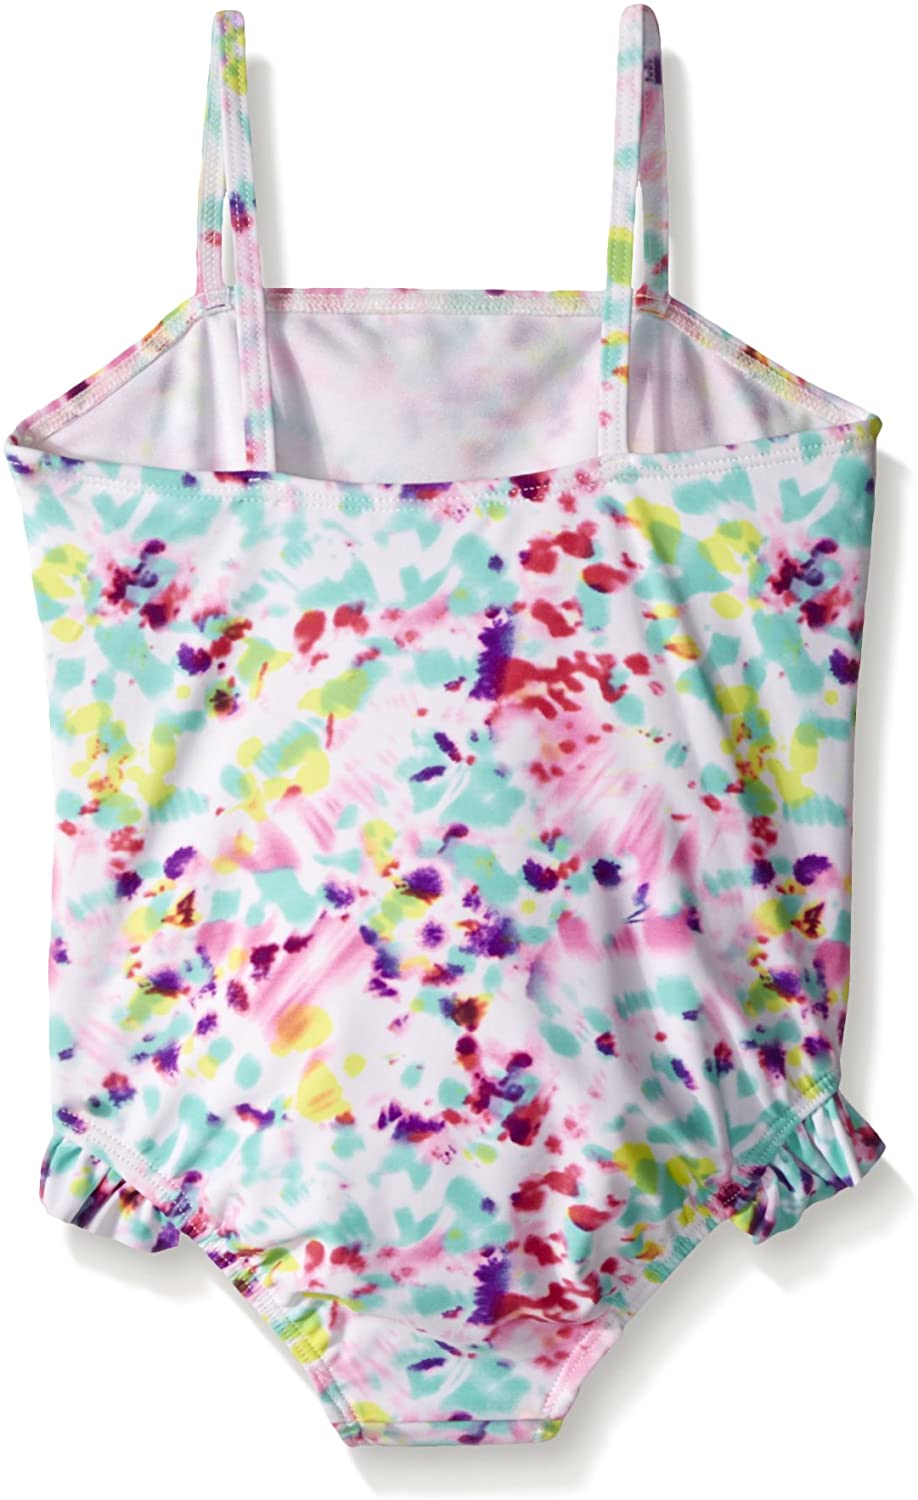 Kensie Apparel 6 Years Confetti One Piece Swimsuit